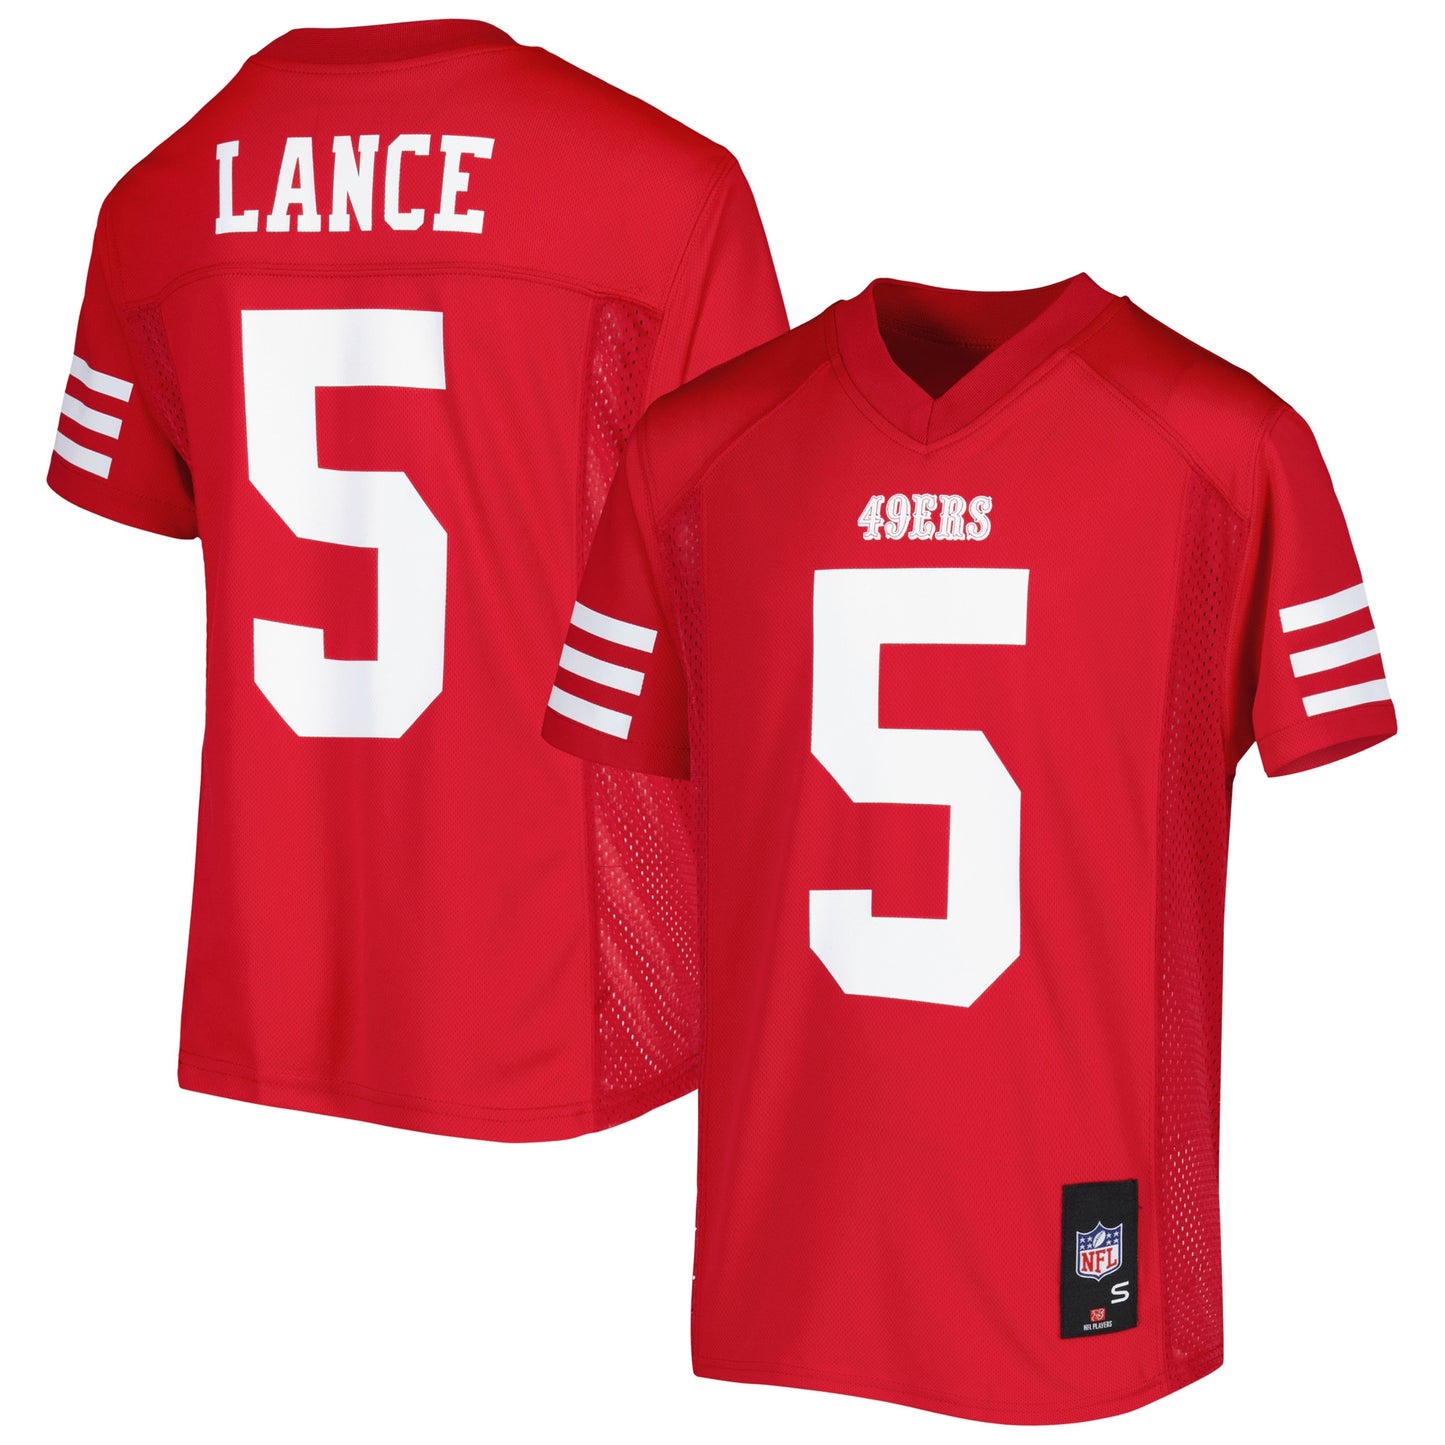 Trey Lance San Francisco 49ers Youth Team Replica Player Jersey - Scarlet